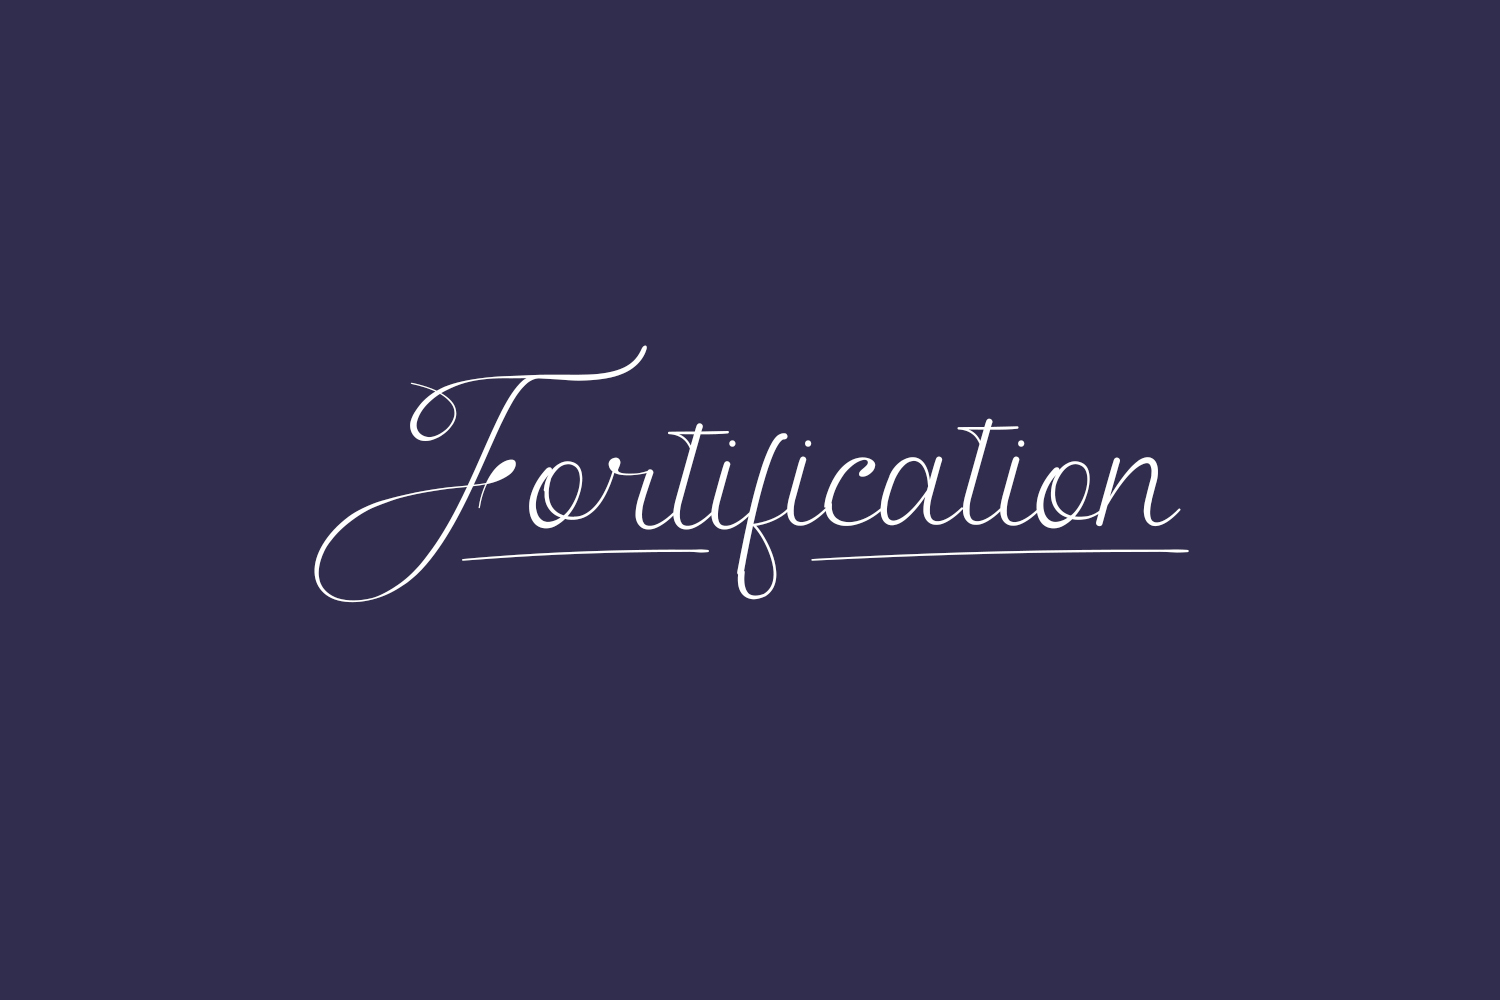 Fortification Free Font